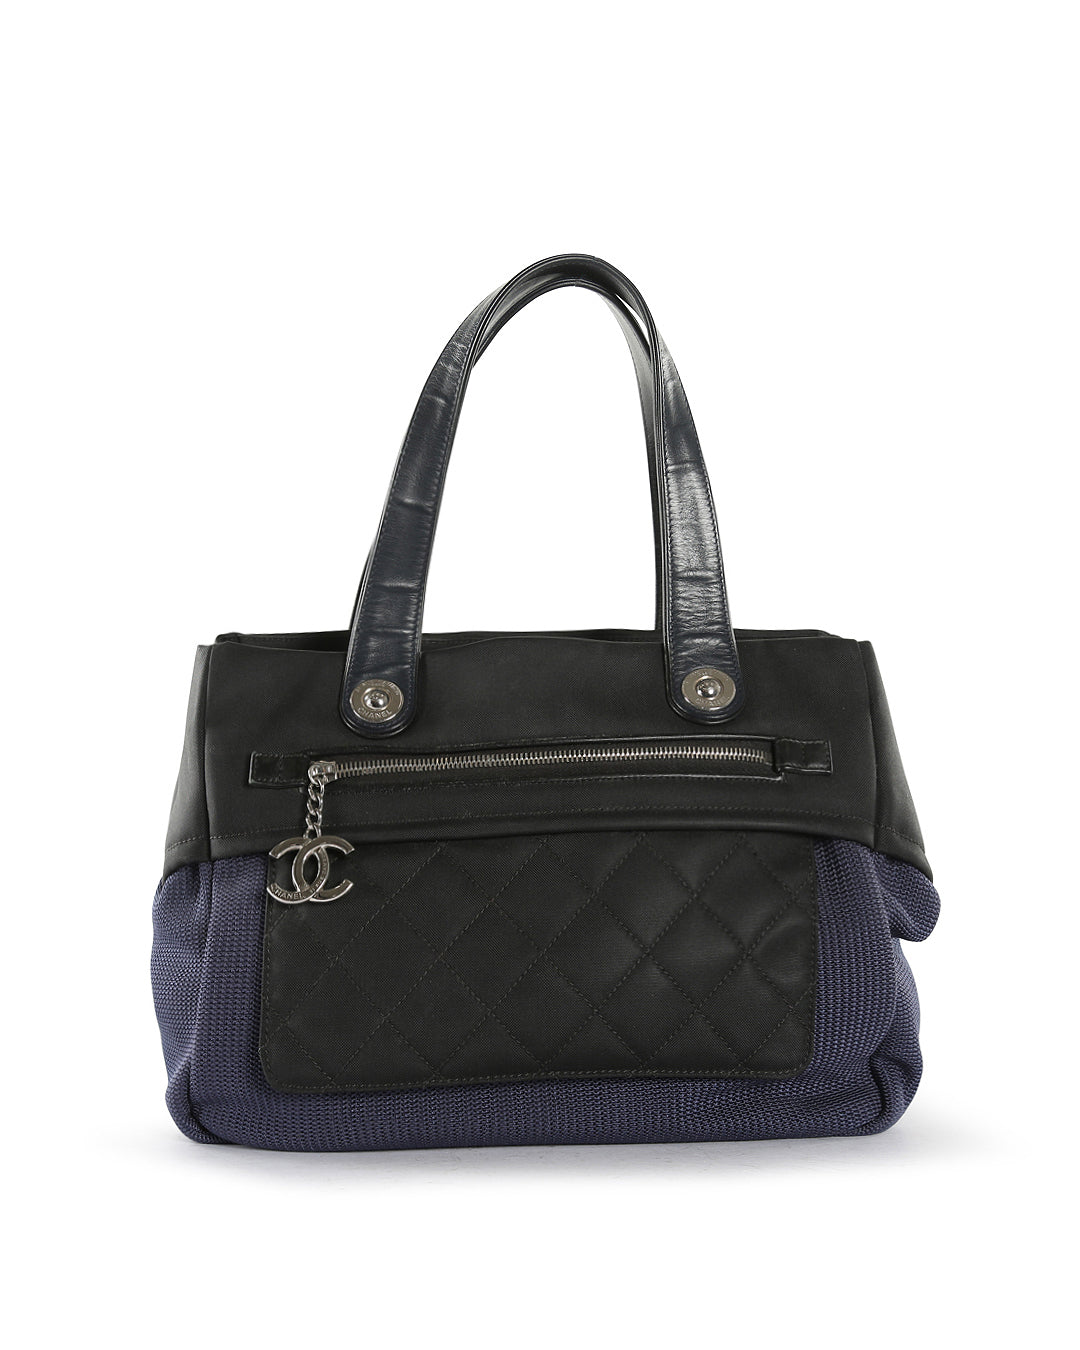 CHANEL Navy Blue/Black Knit & Canvas Tote Bag